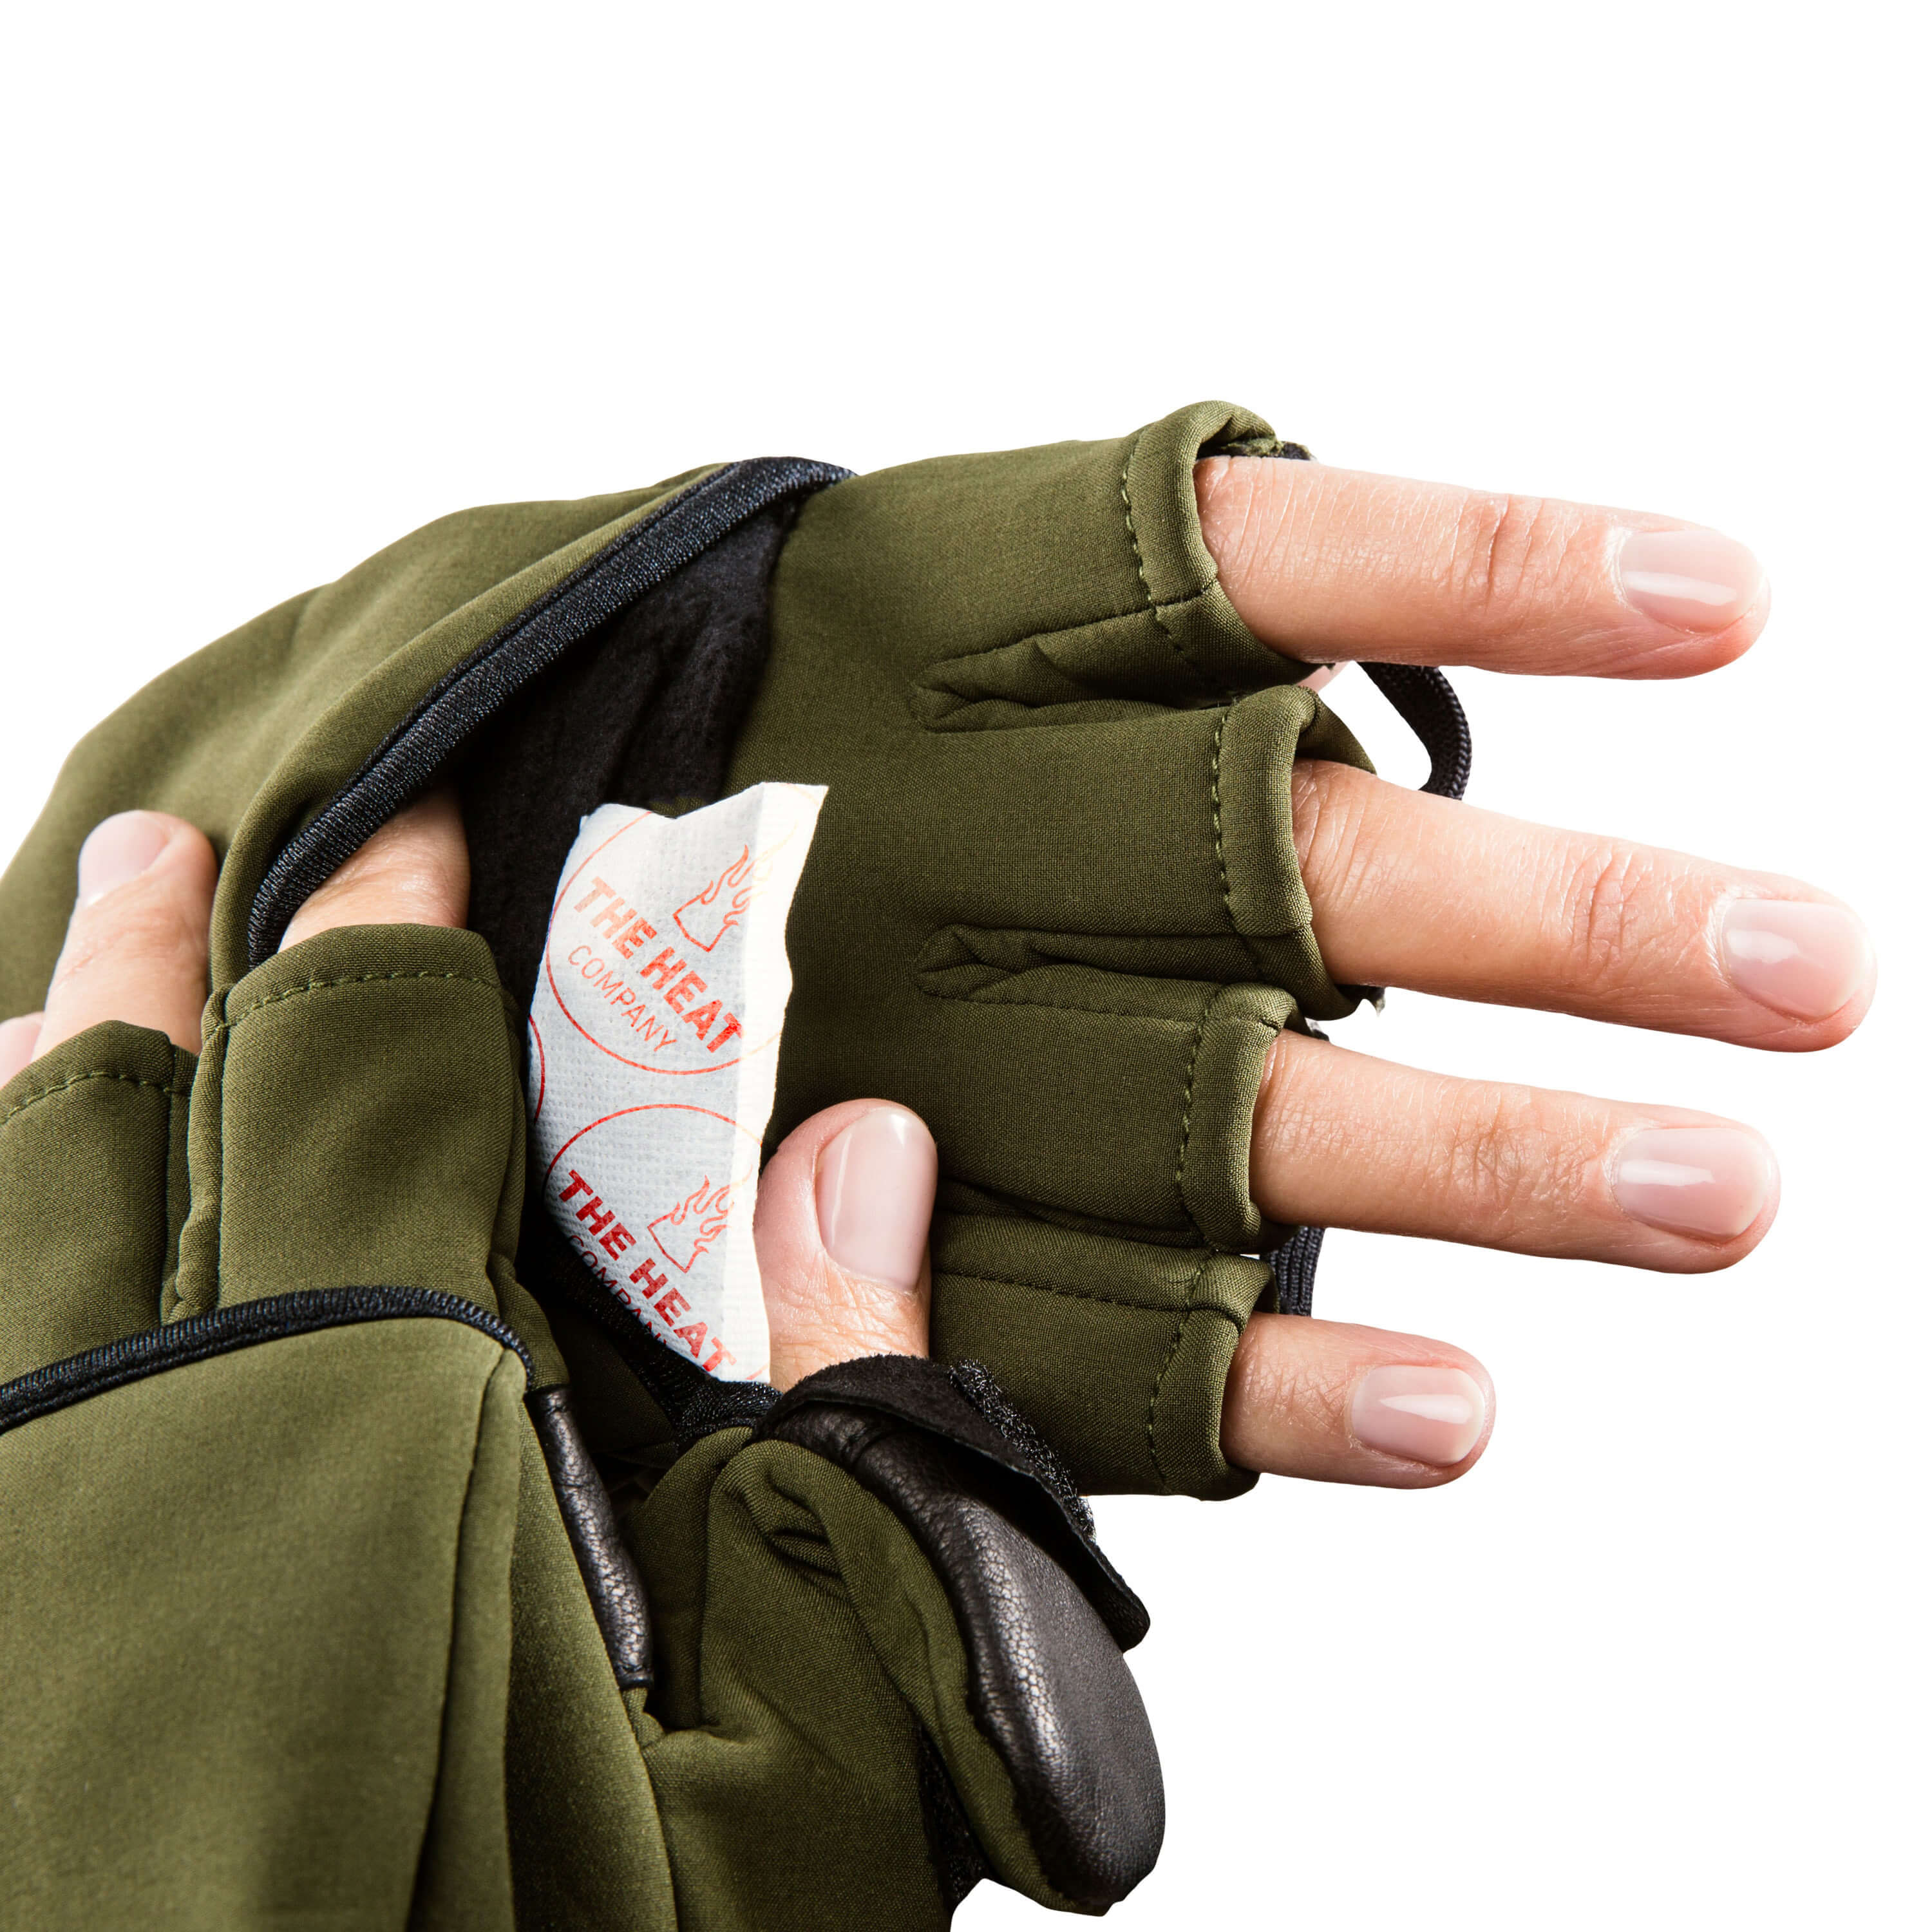 Up to 10 Hours Heat! Hand Warmers 12 PCS Disposable Hand Pocket Glove Warmers 